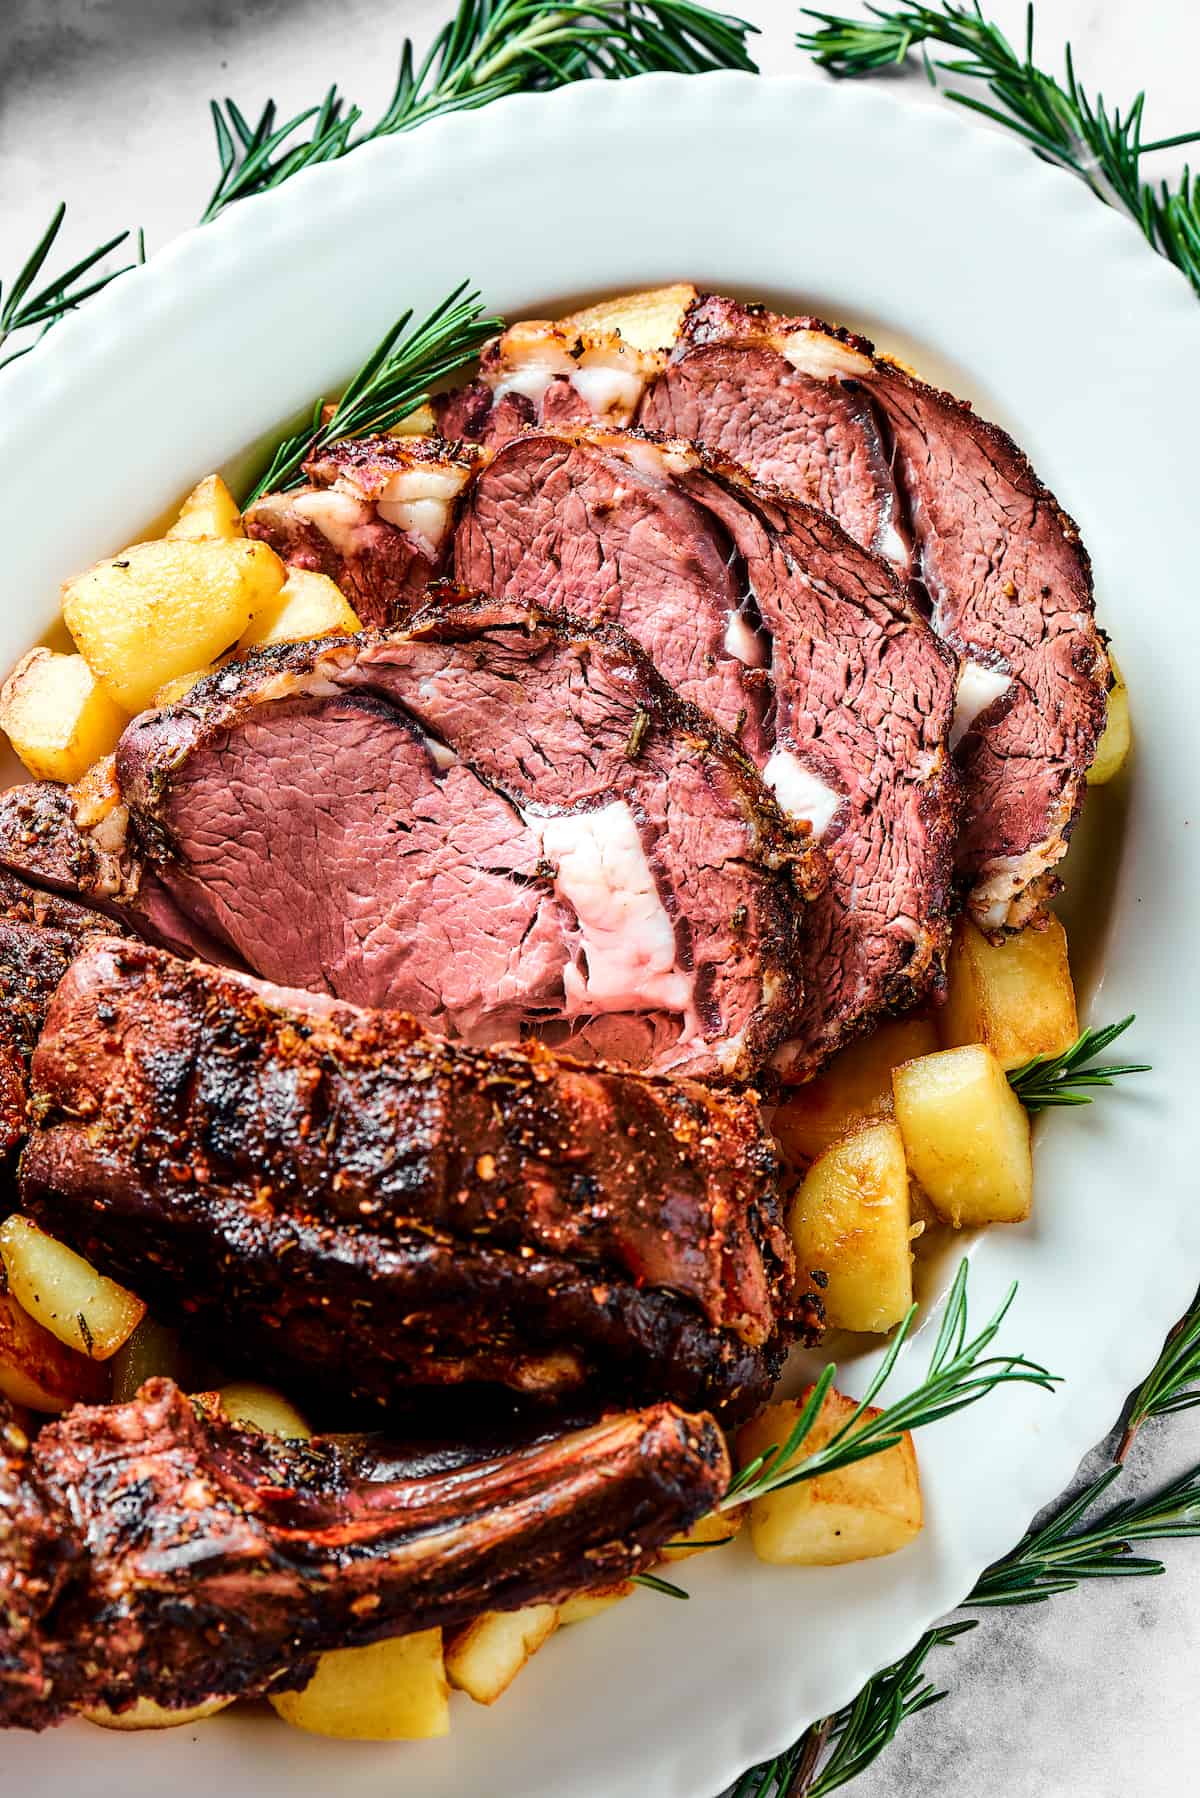 Sliced standing rib roast on a serving patter with potatoes and herbs.